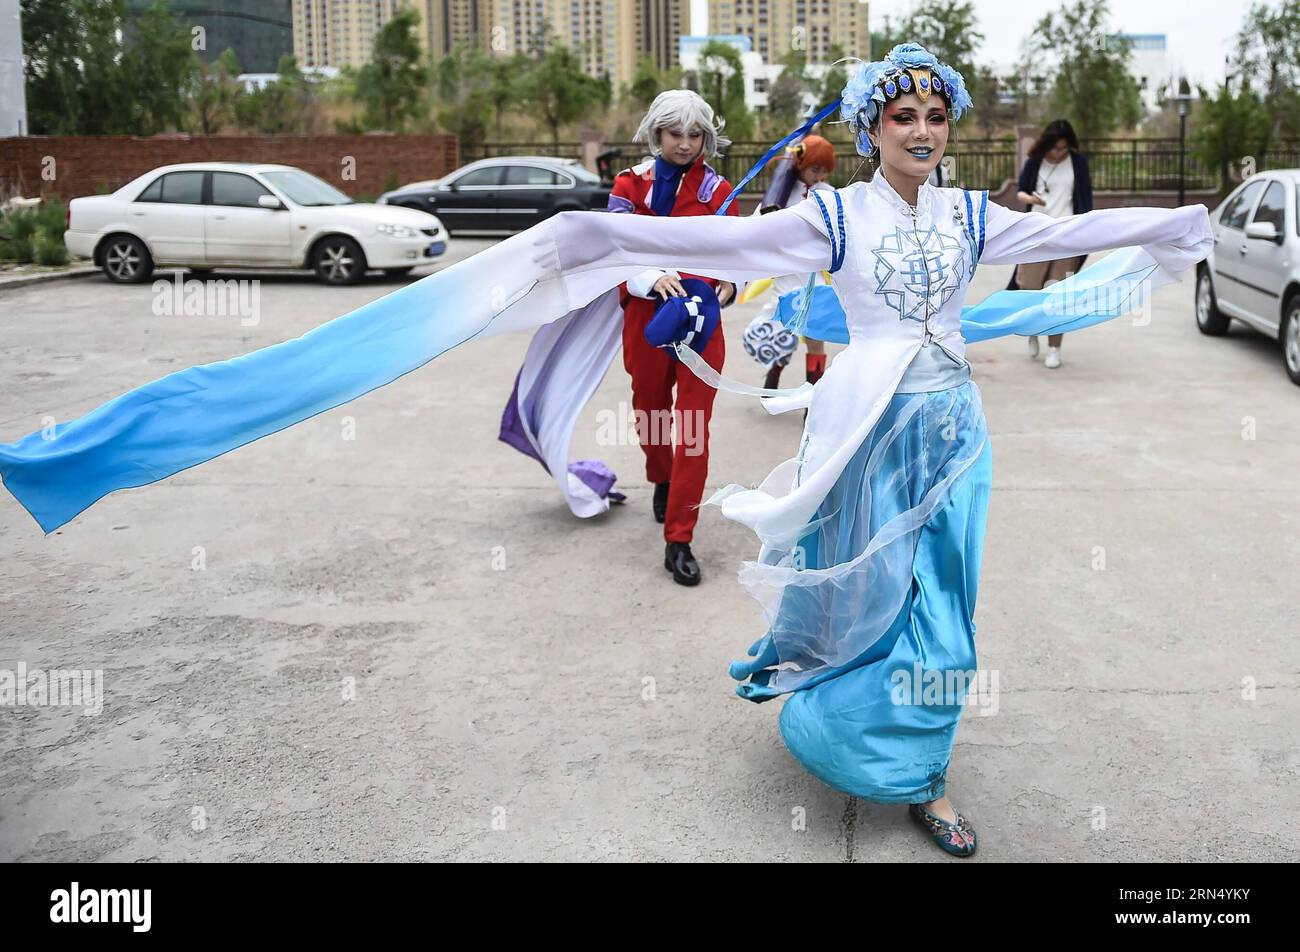 150605) -- CHANGCHUN, June 5, 2015 -- Members of the cosplay studio SAN  show their costumes in Changchun, northeast China s Jilin Province, June 5,  2015. The 22-year-old Wang Xintong is a